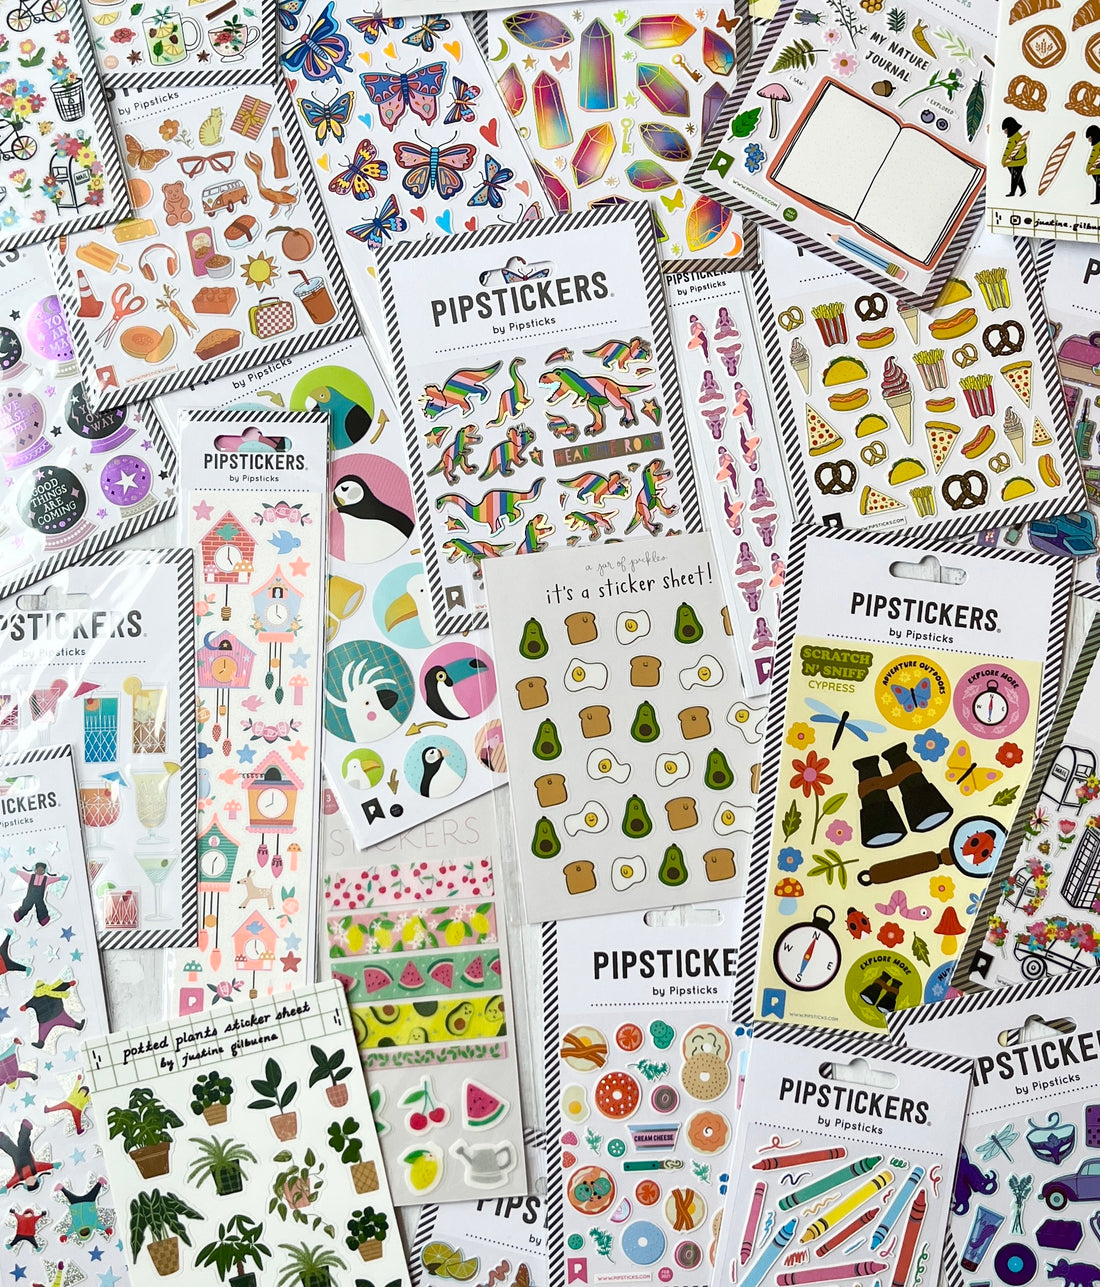 Why We Love Stickers